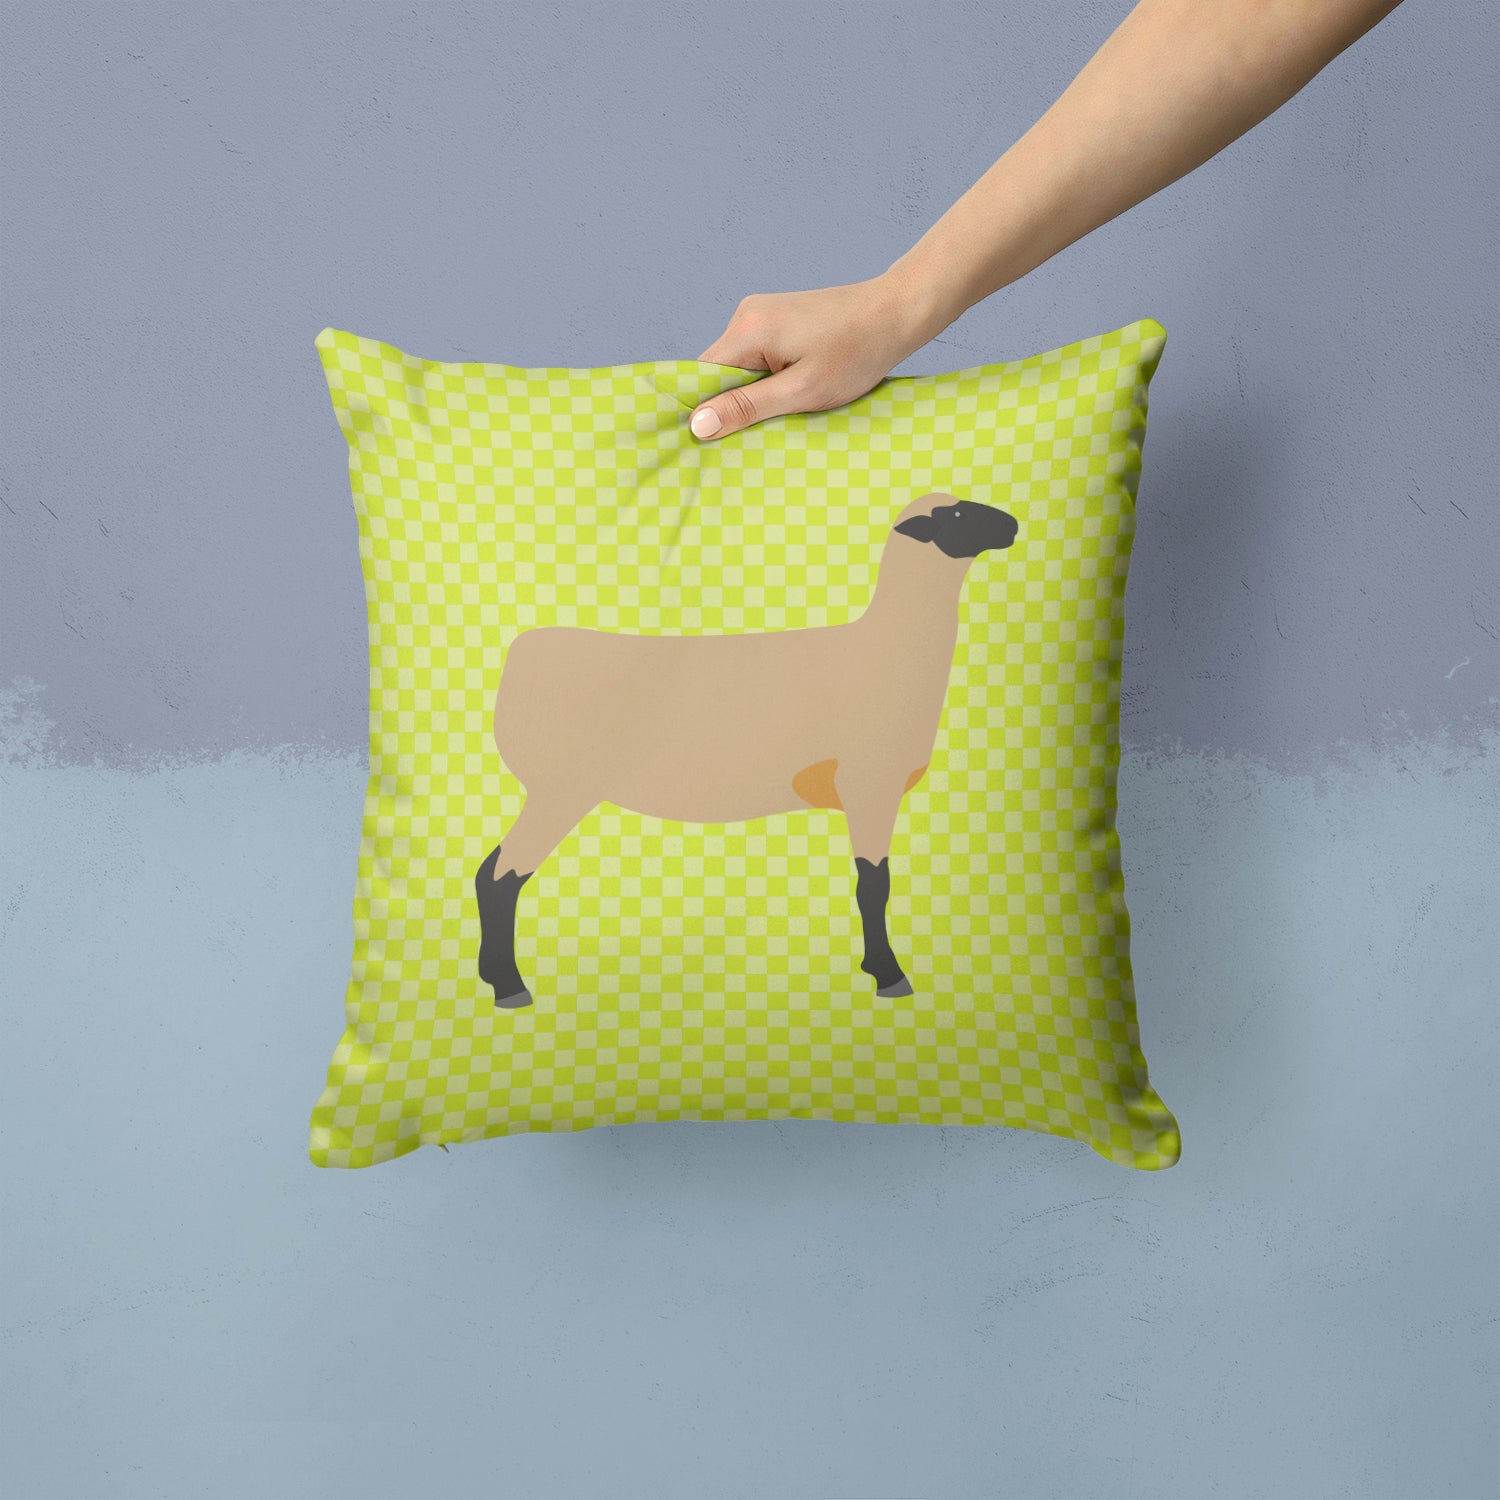 Hampshire Down Sheep Green Fabric Decorative Pillow BB7802PW1414 - the-store.com